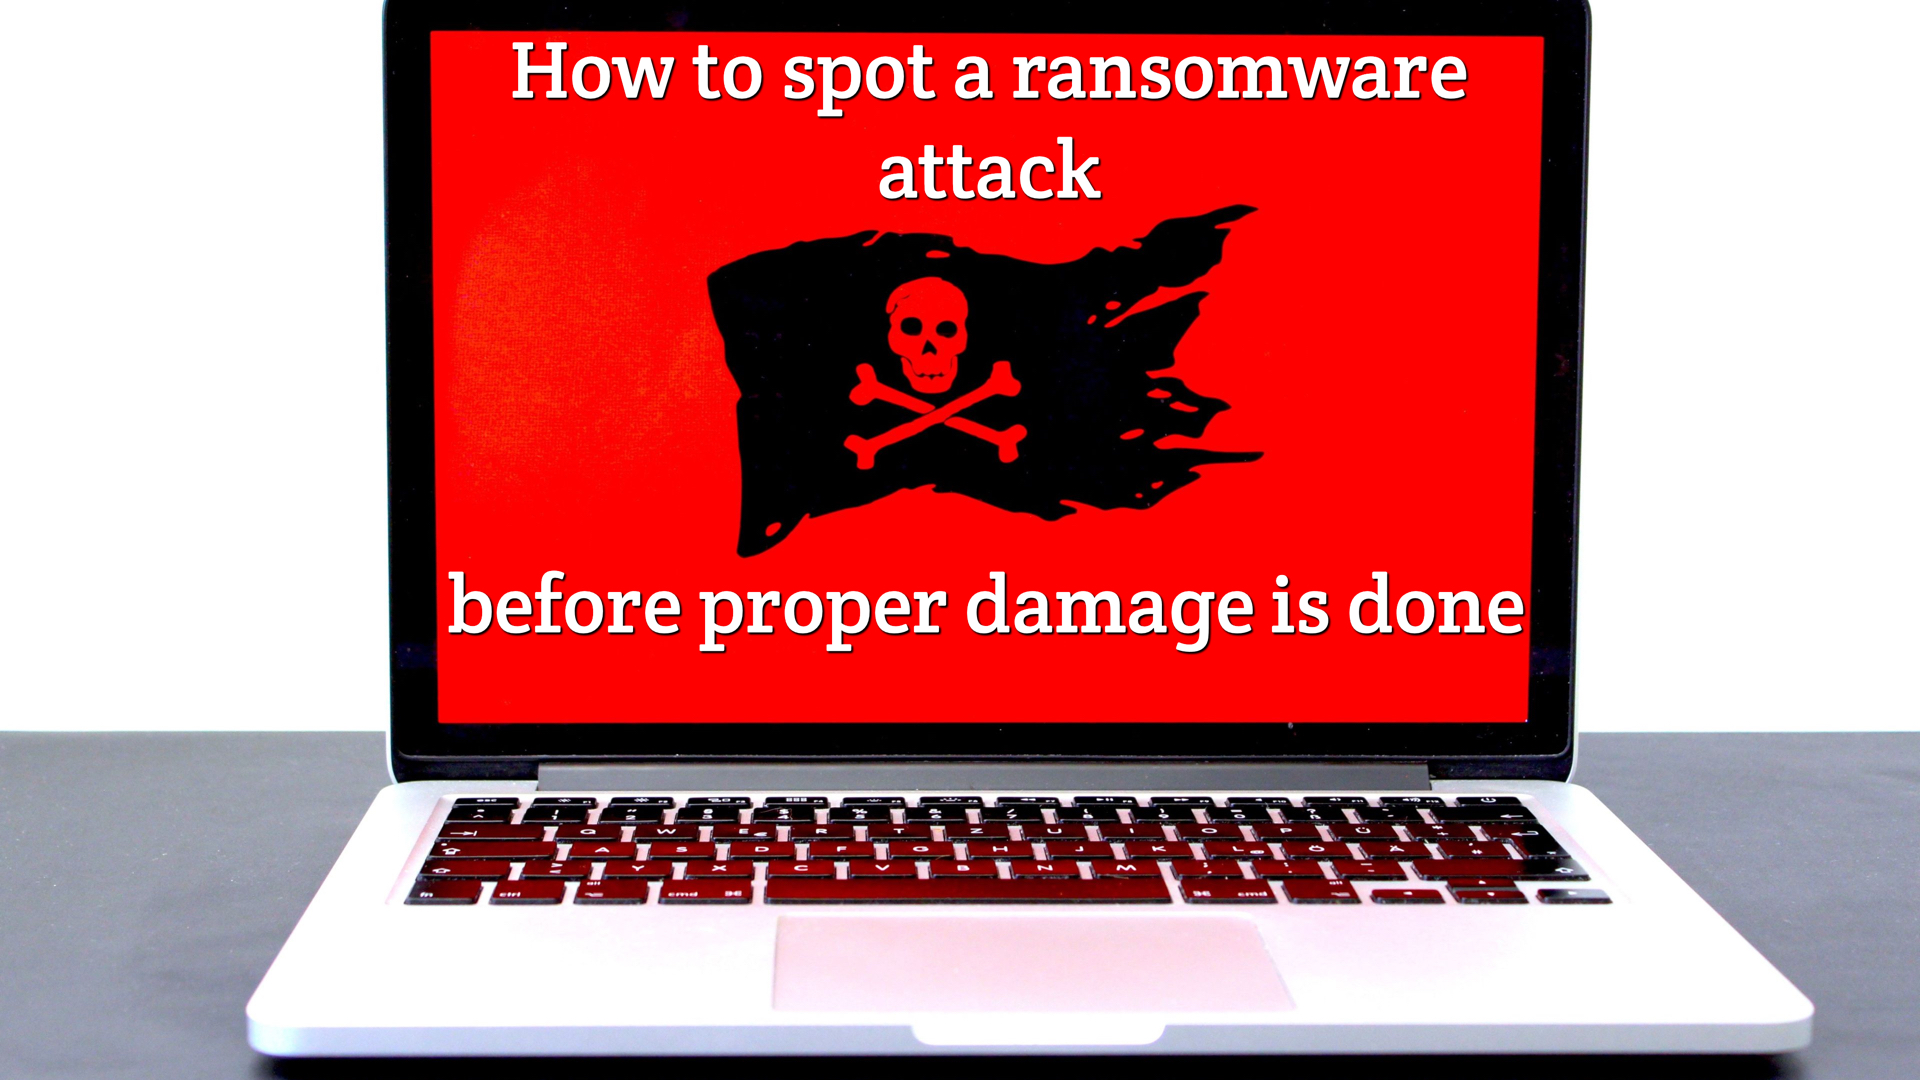 How to spot a ransomware attack before proper damage is done